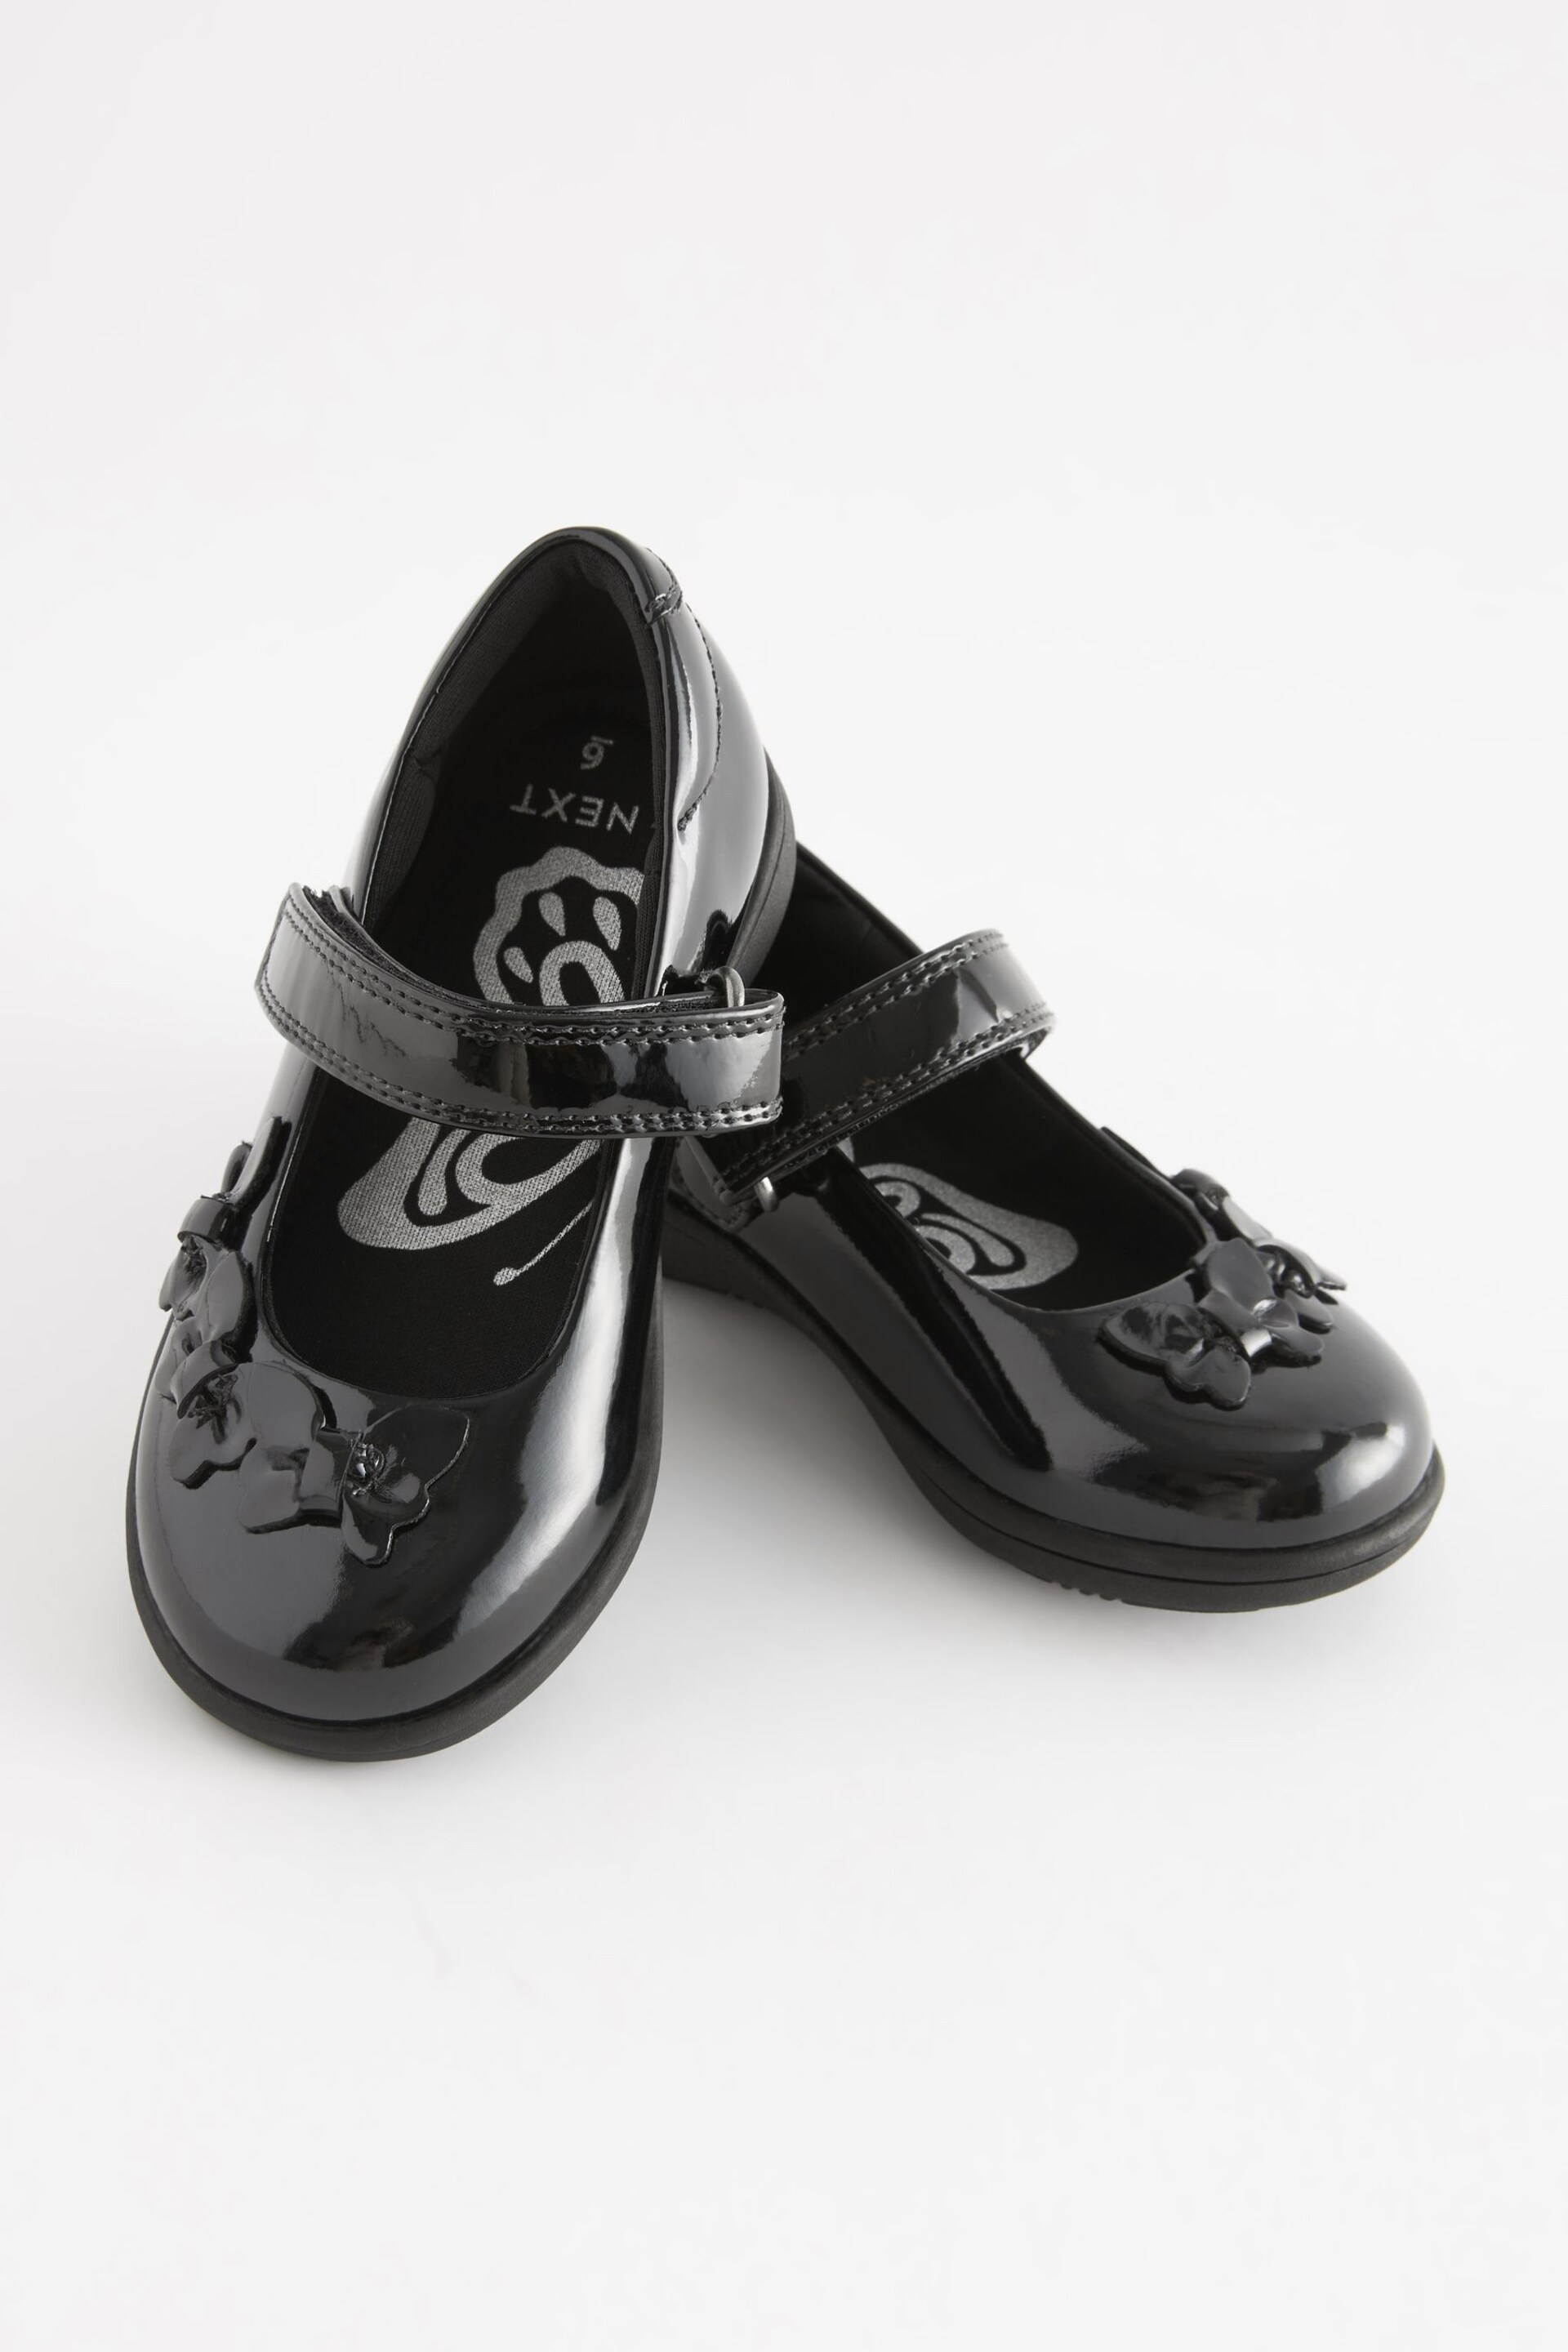 Black Patent Standard Fit (F) School Junior Butterfly Mary Jane Shoes - Image 1 of 7